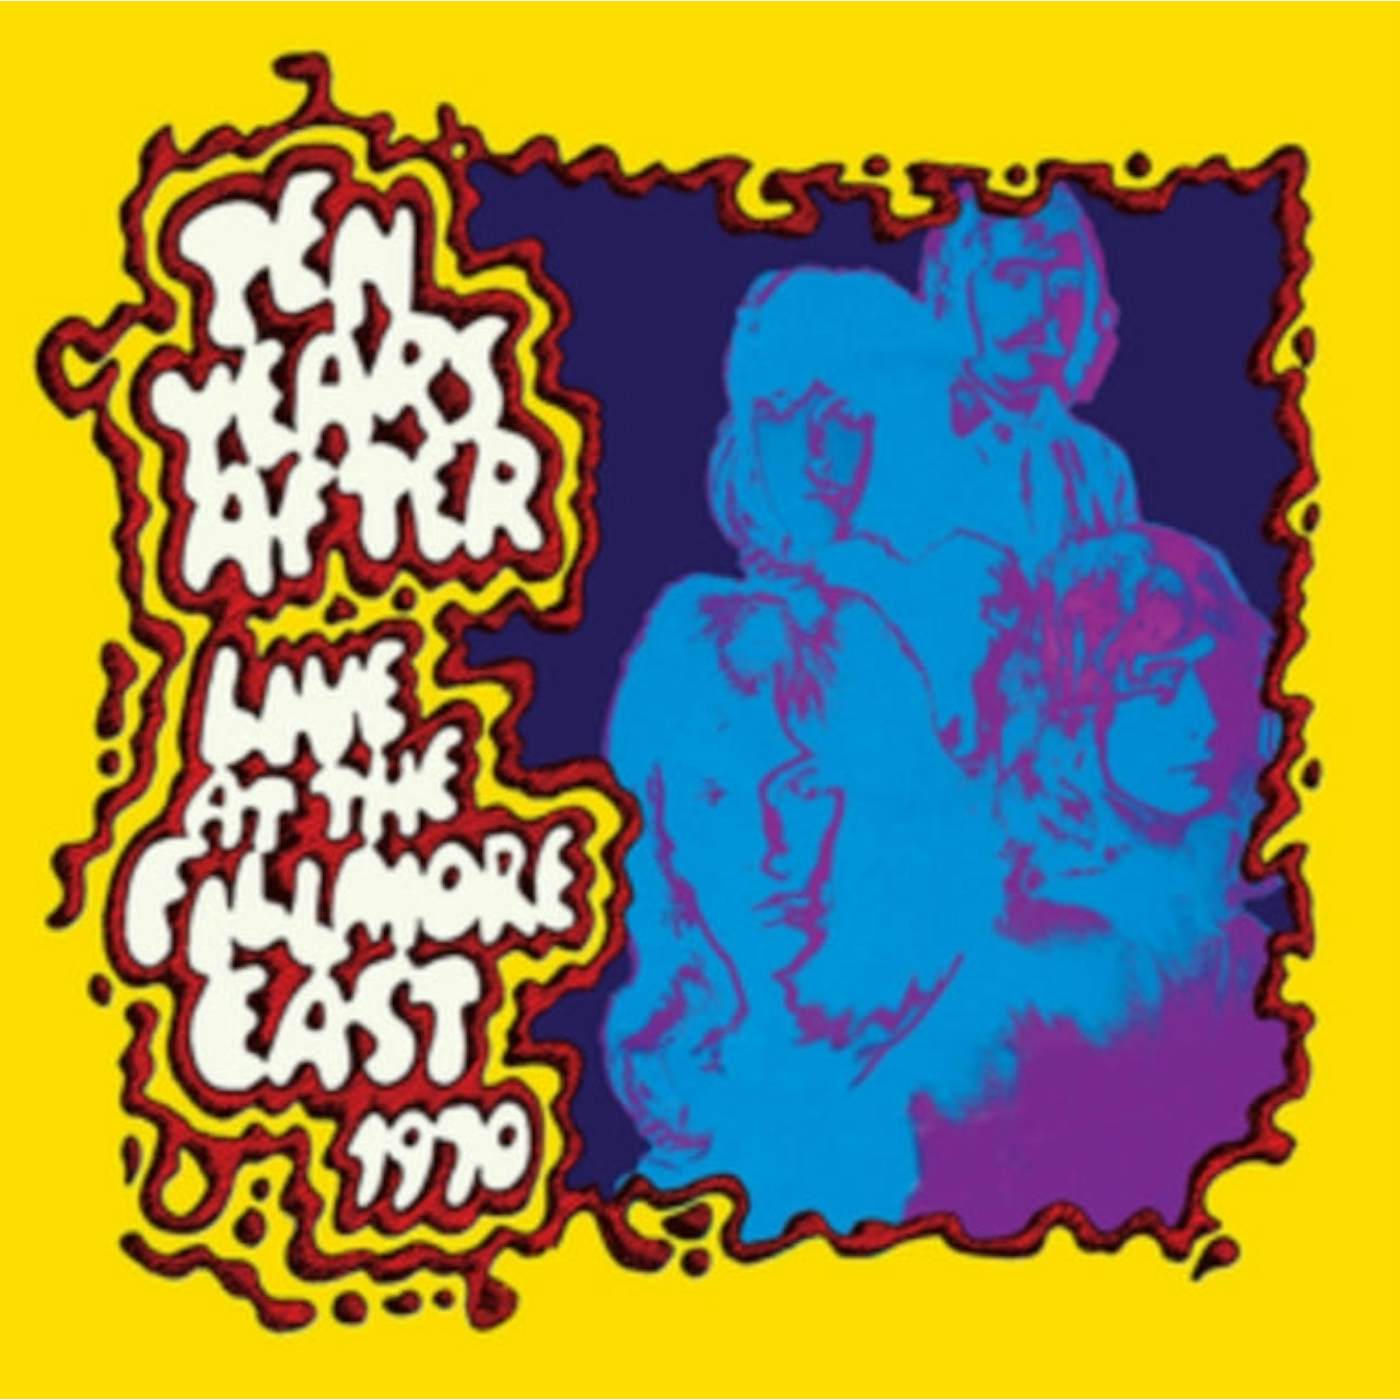 Ten Years After LP - Live At The Fillmore East (Vinyl)